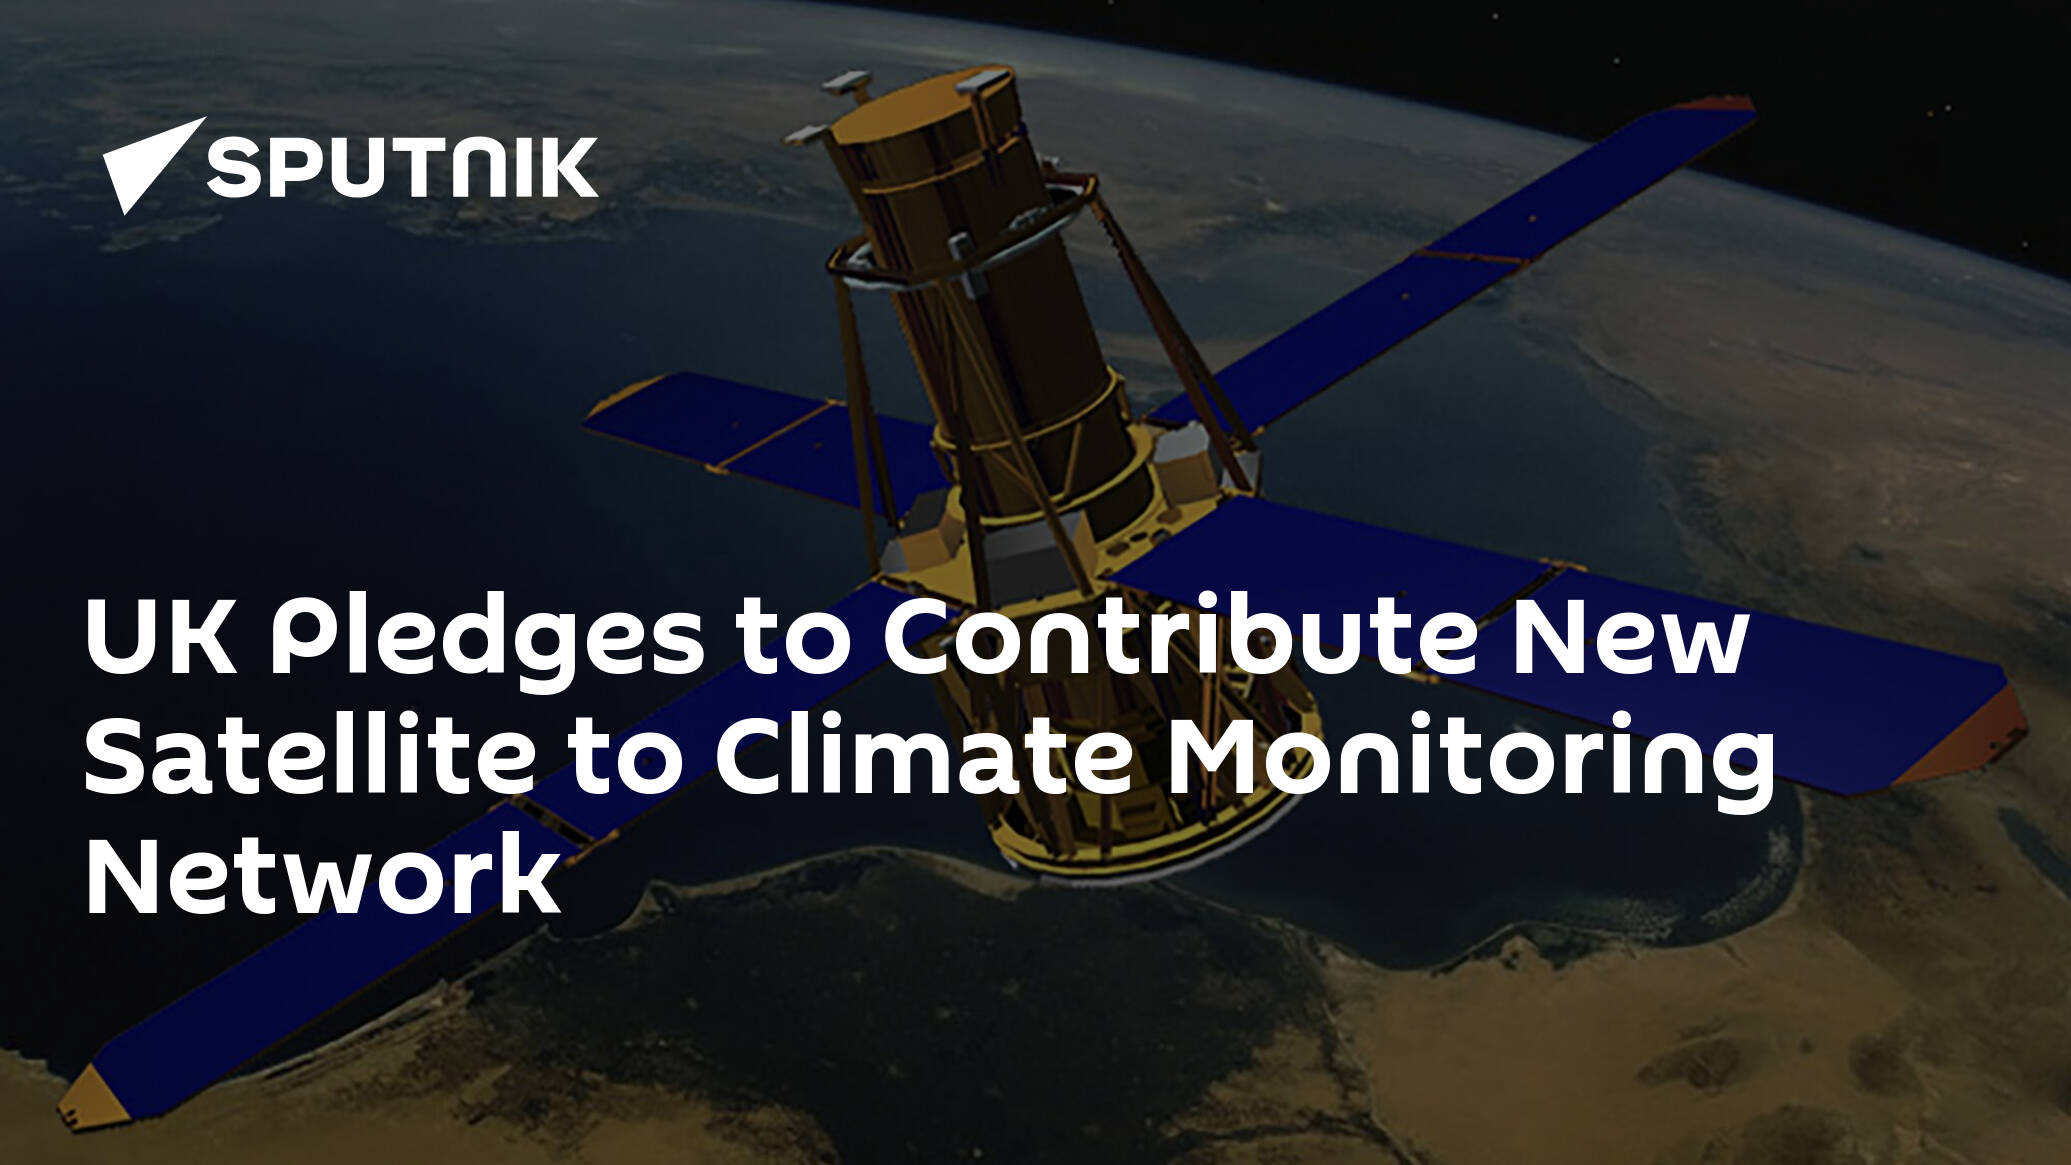 UK Pledges to Contribute New Satellite to Climate Monitoring Network